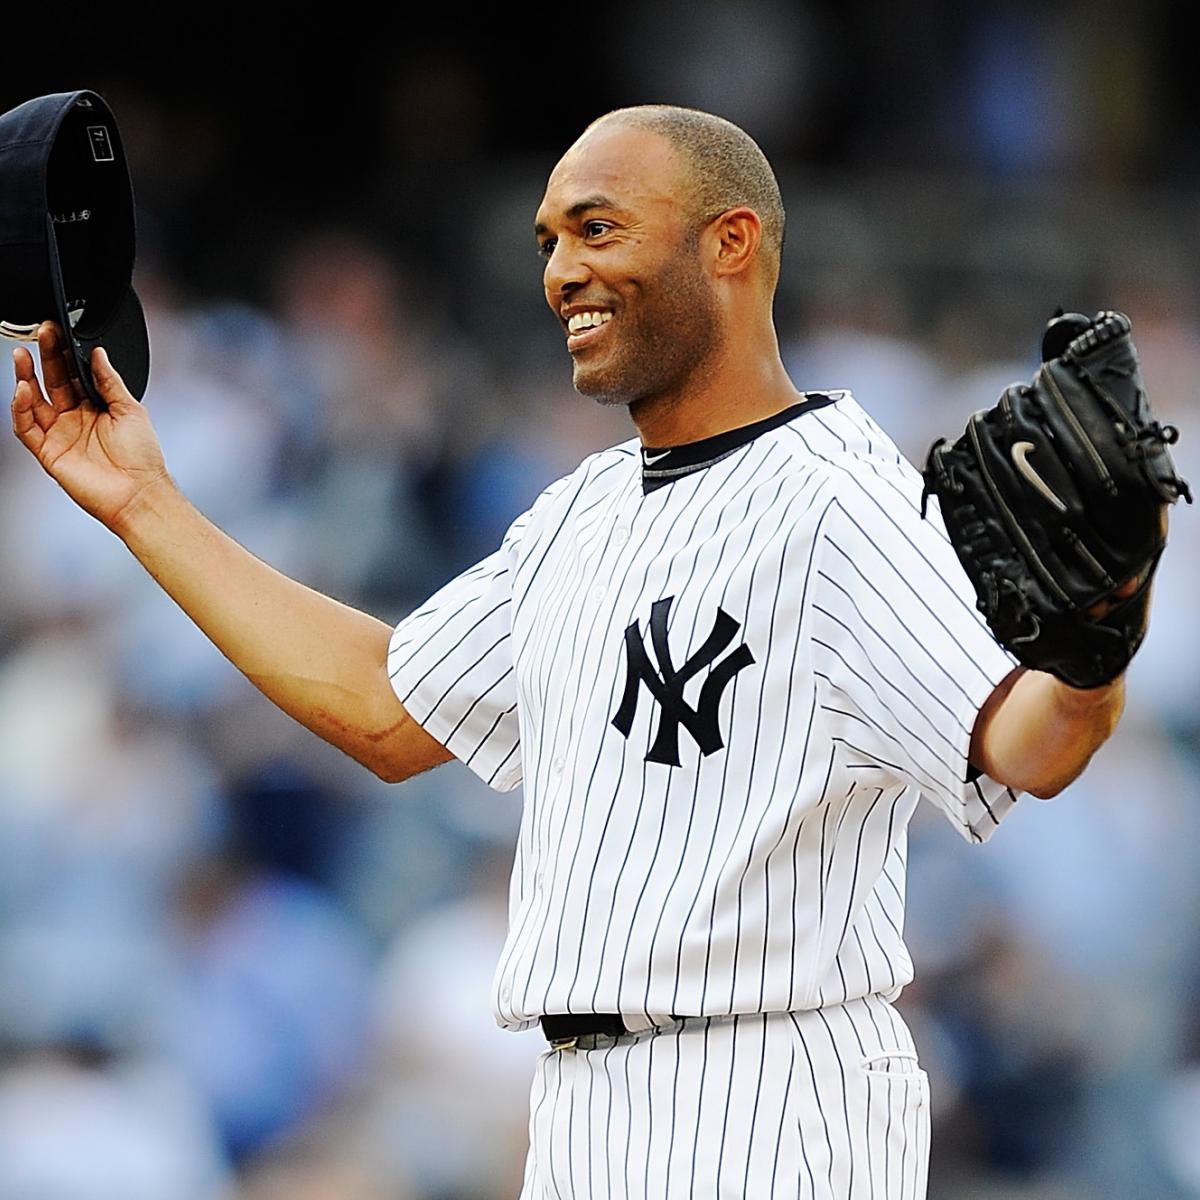 Yankees' Mariano Rivera Tears Ligament in Knee - The New York Times